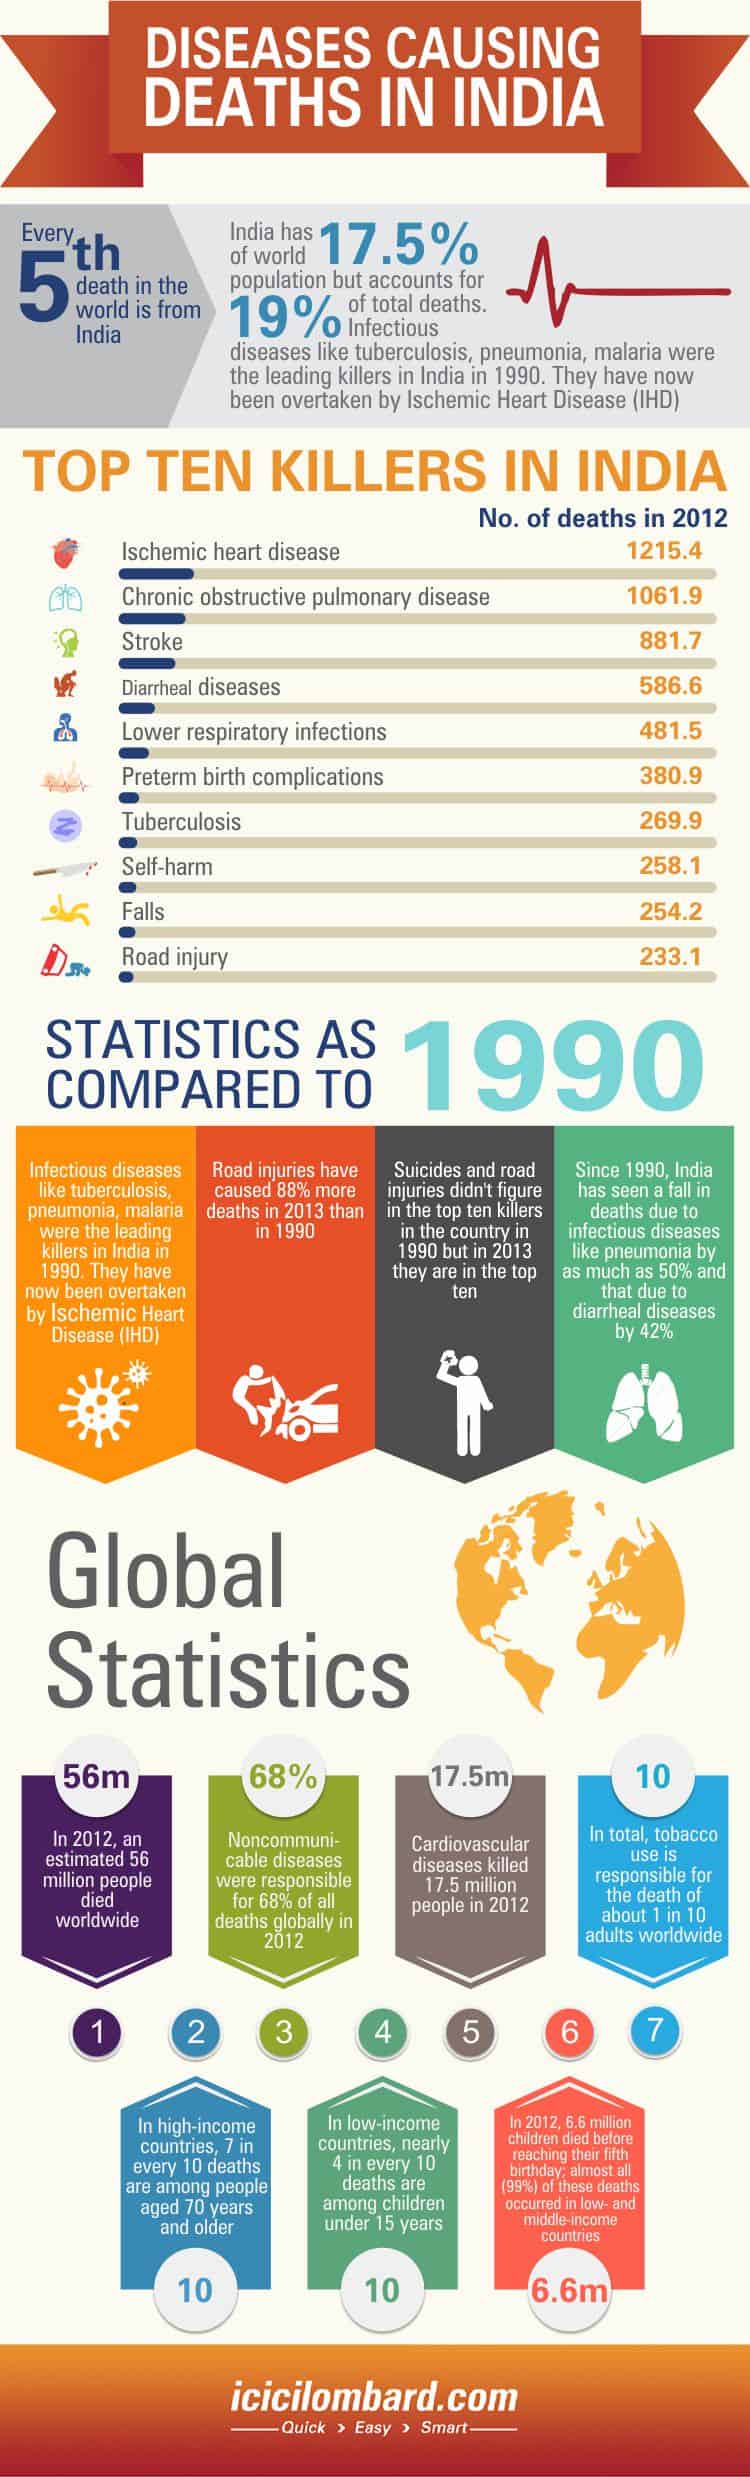 Diseases Causing Deaths in India Infographic